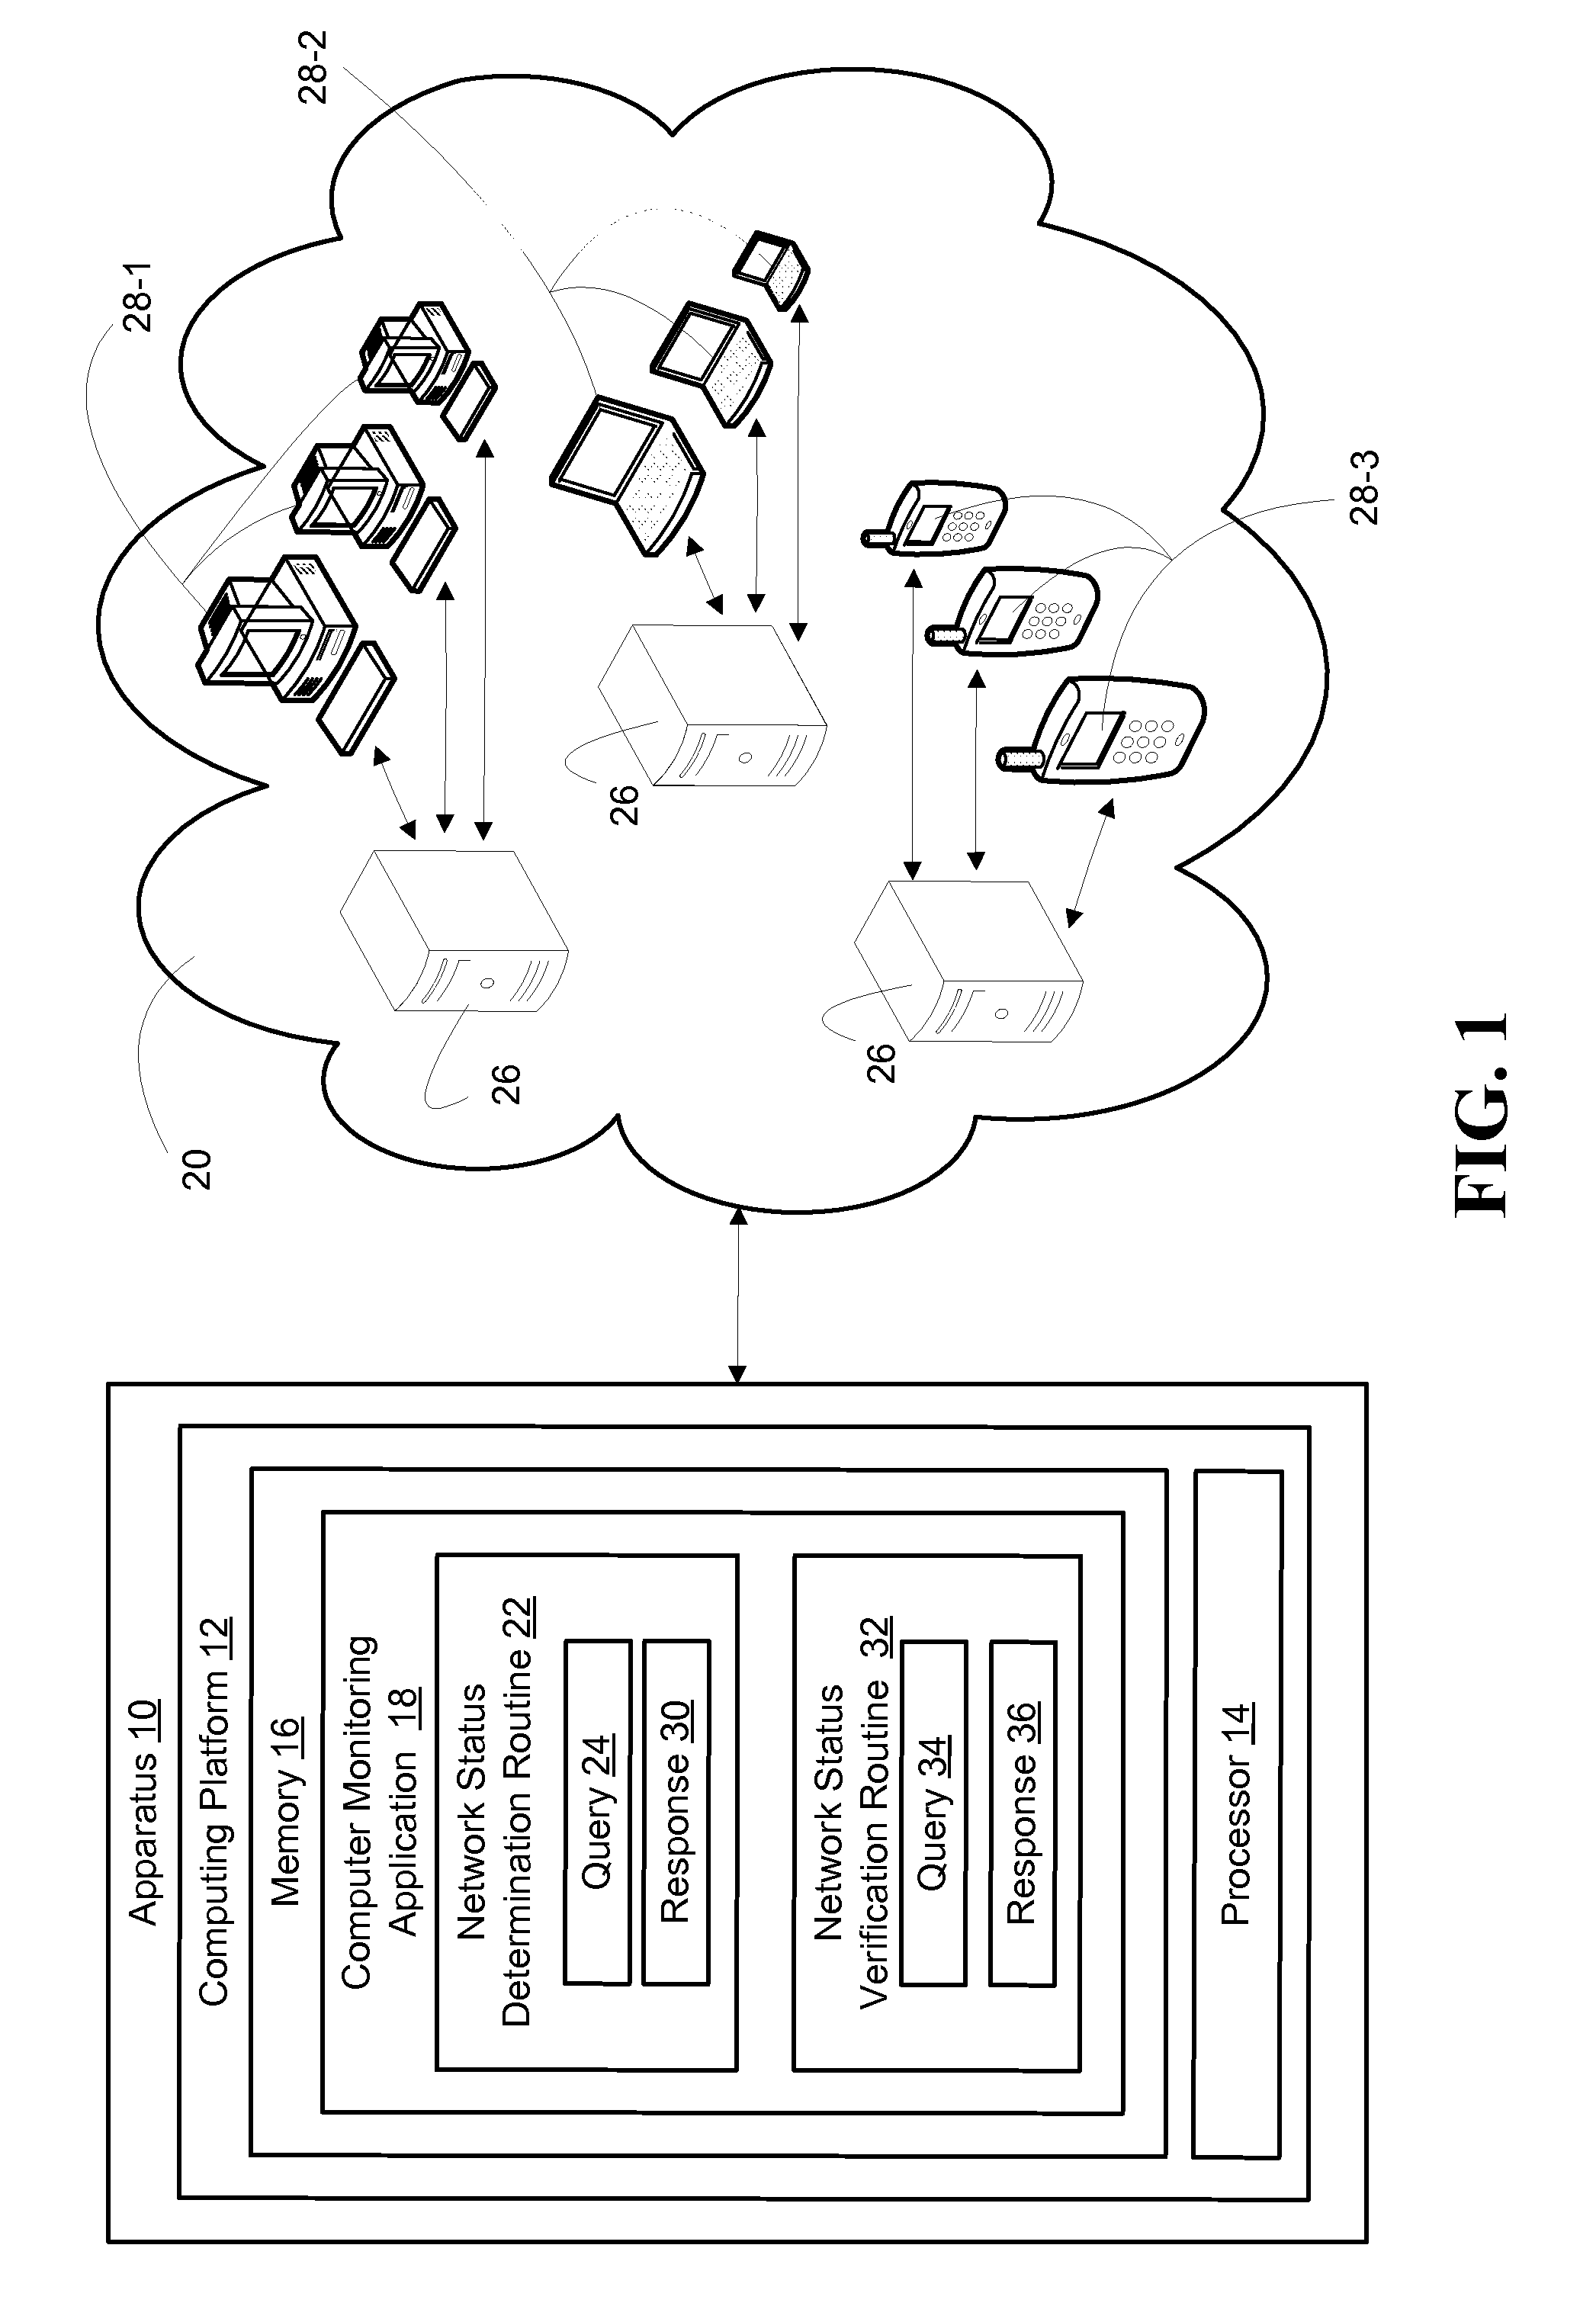 Monitoring an enterprise network for determining specified computing device usage